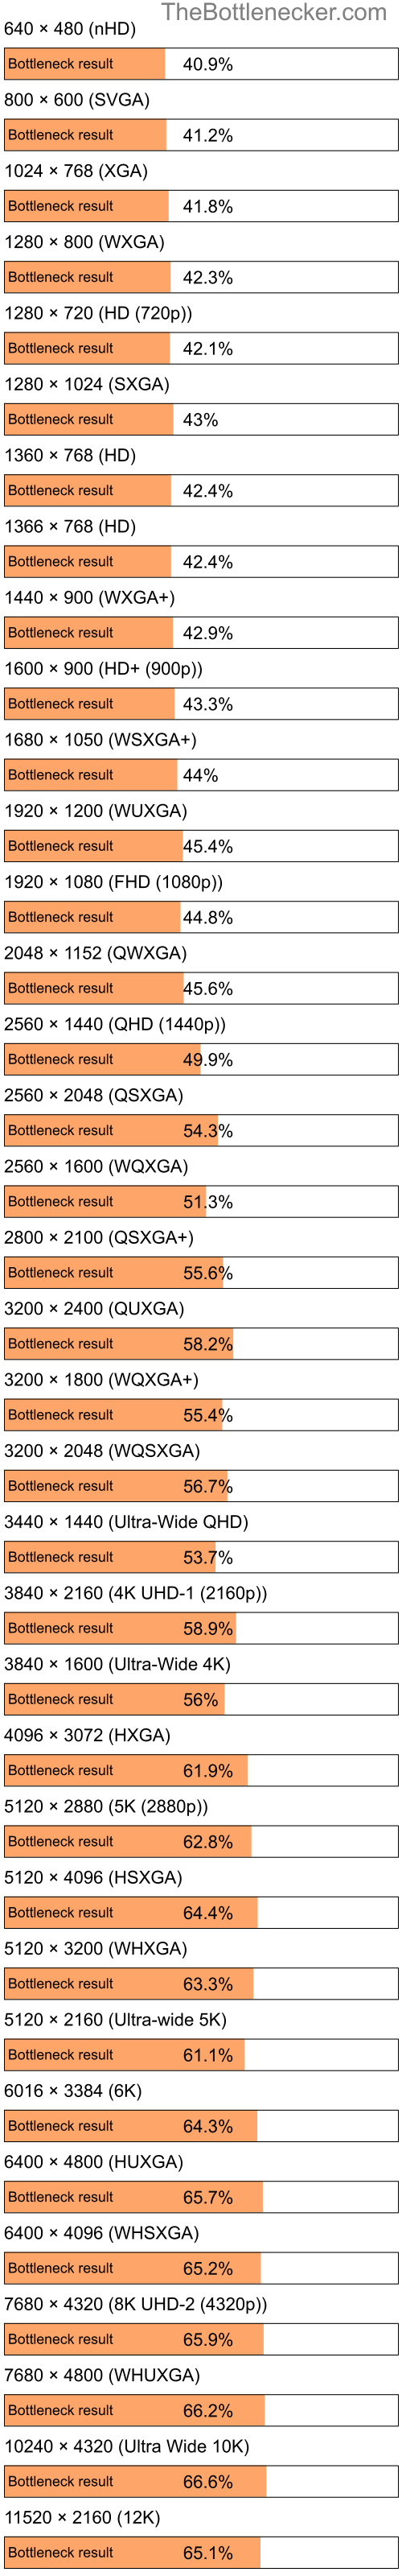 Bottleneck results by resolution for Intel Core i7-12700KF and NVIDIA GeForce GTX 1050 Ti in Graphic Card Intense Tasks